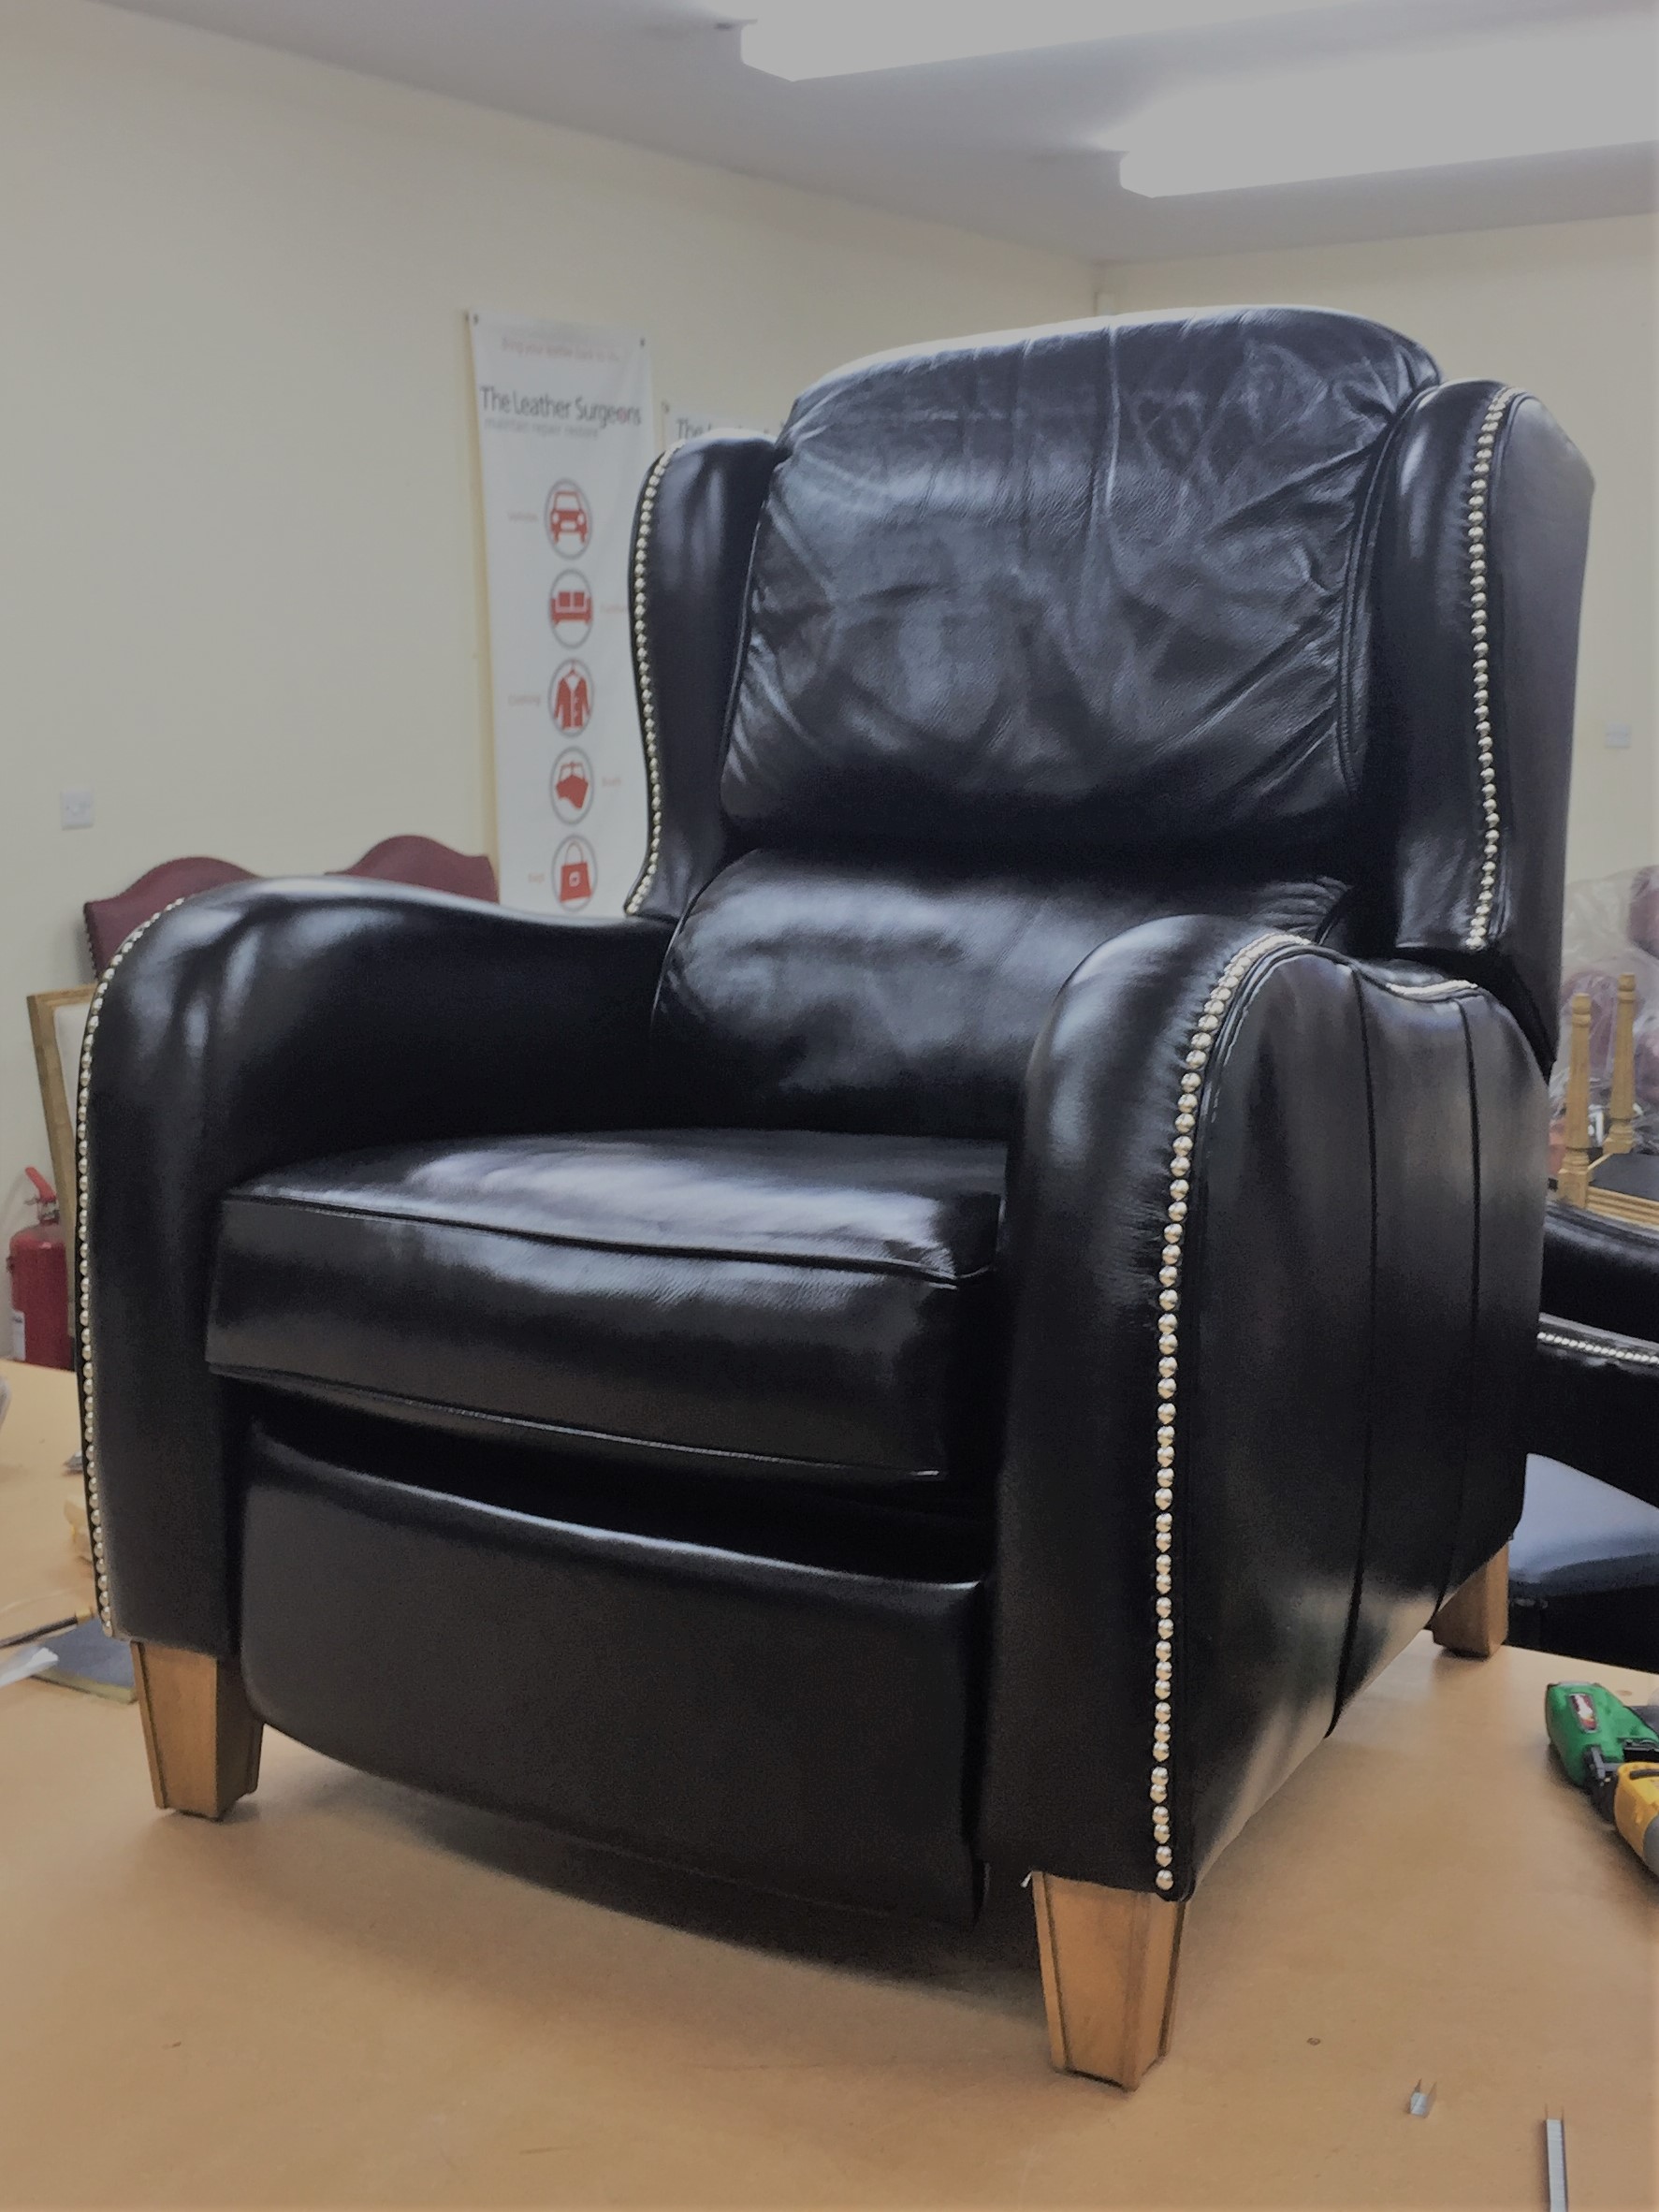 Changing the colour of a leather armchair